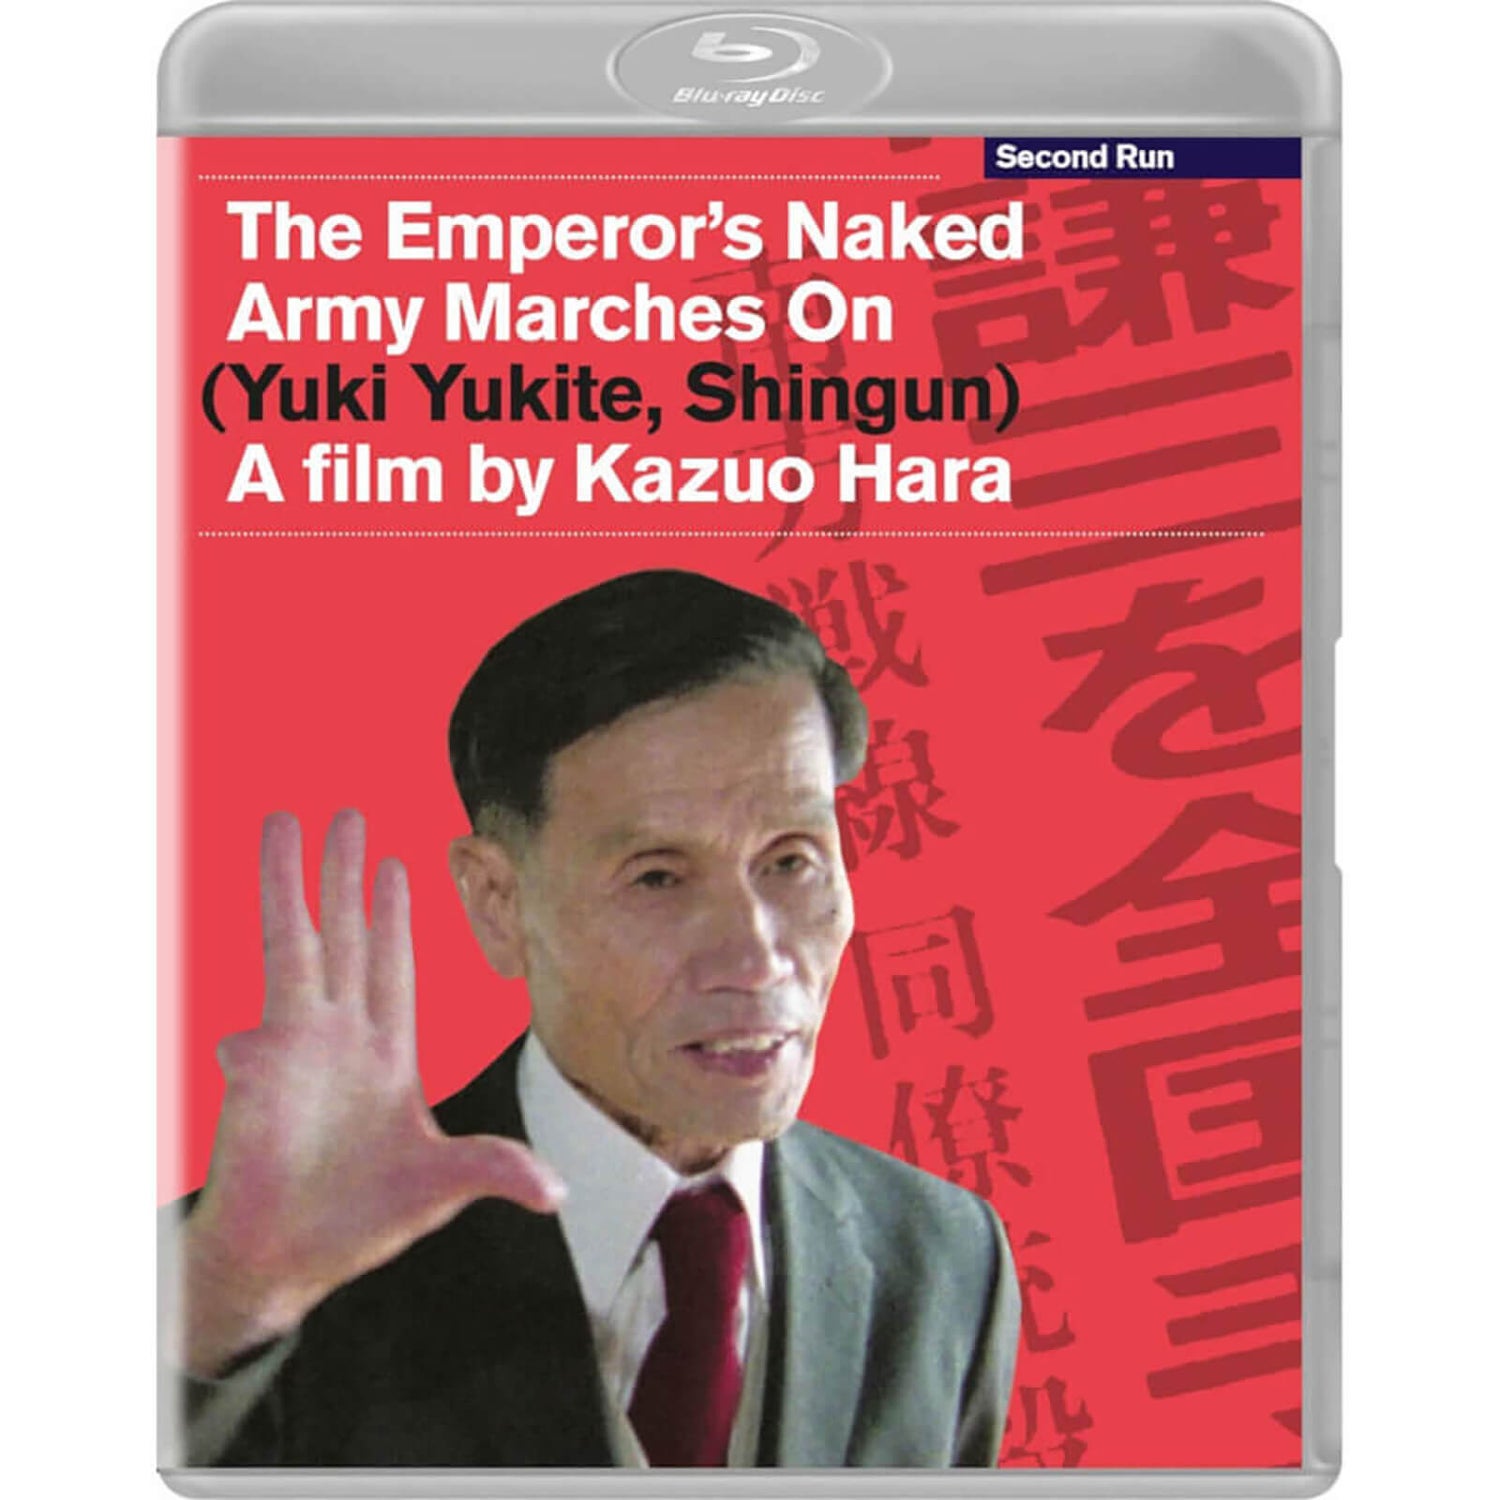 The Emperor's Naked Army Marches On Blu-ray